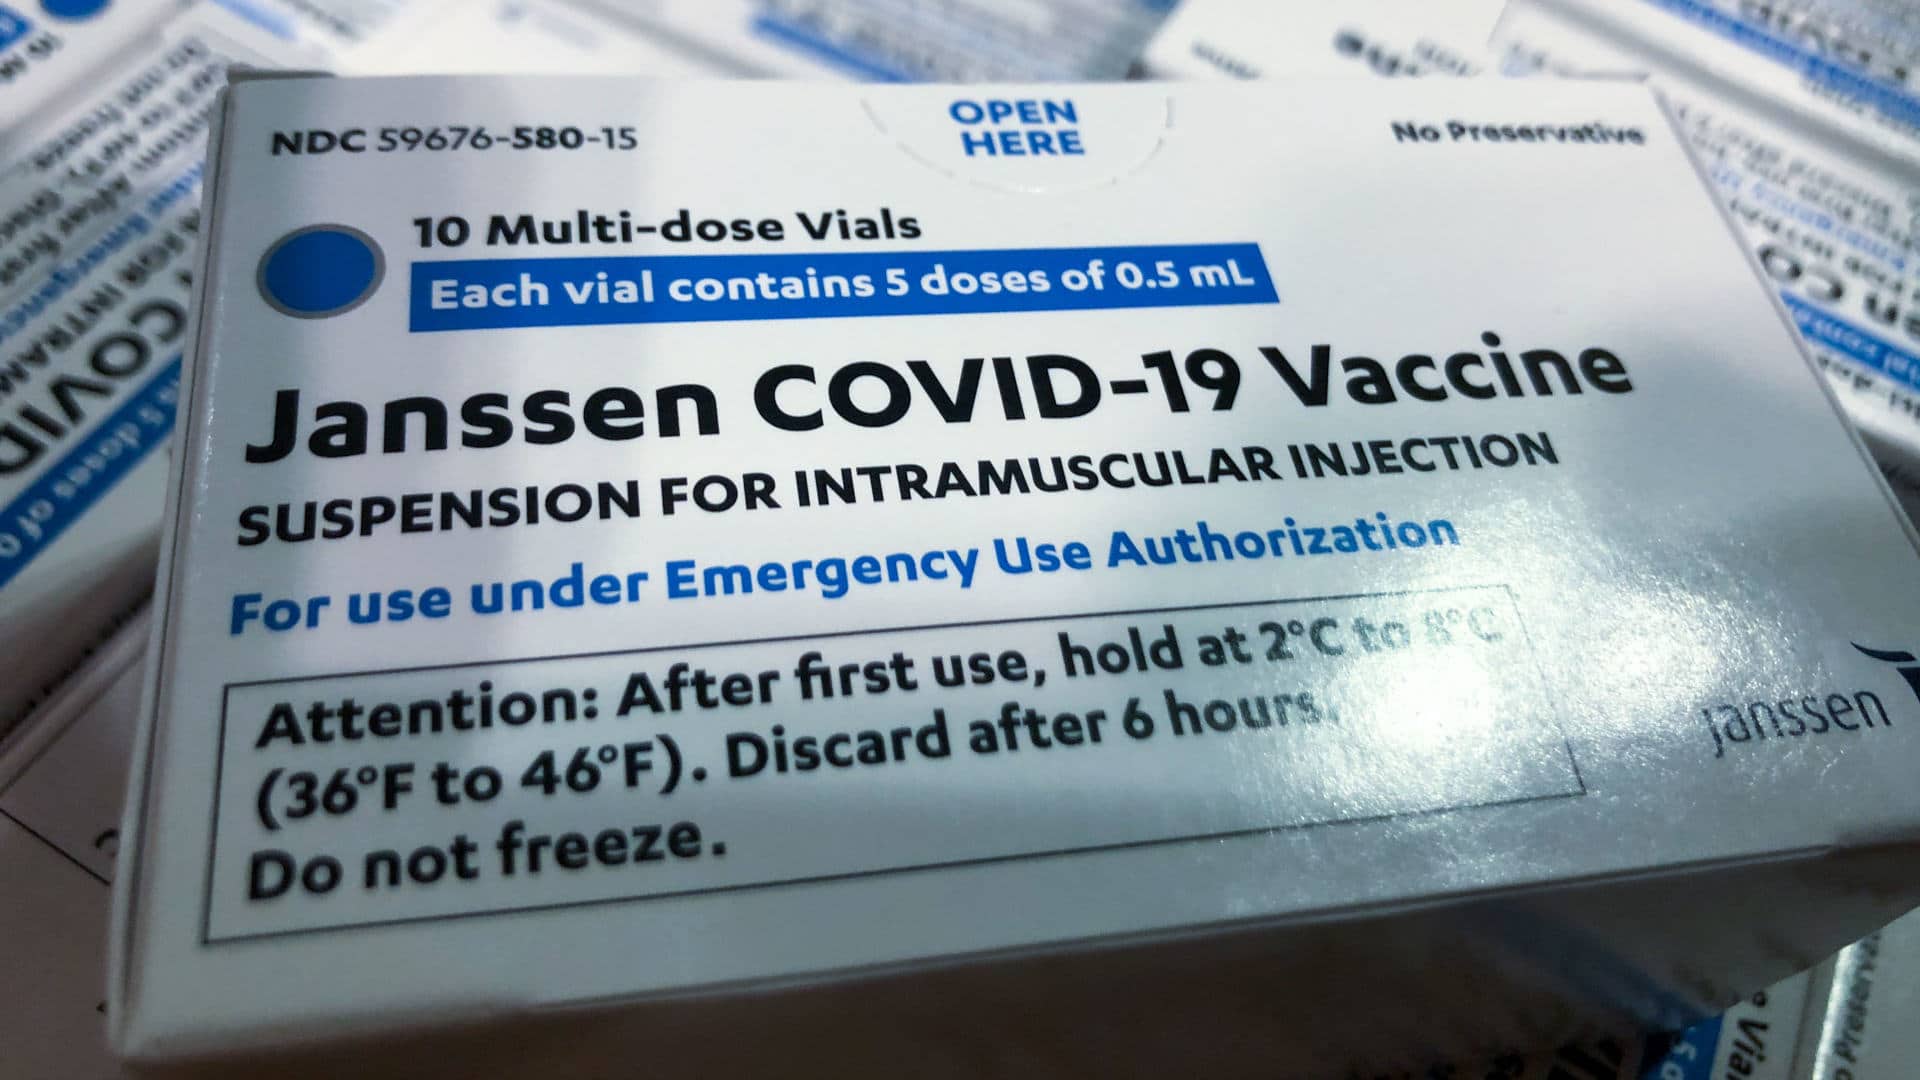 The first doses of the Johnson and Johnson Covid-19 vaccine to arrive at the New York State Department of Health in March 2021.